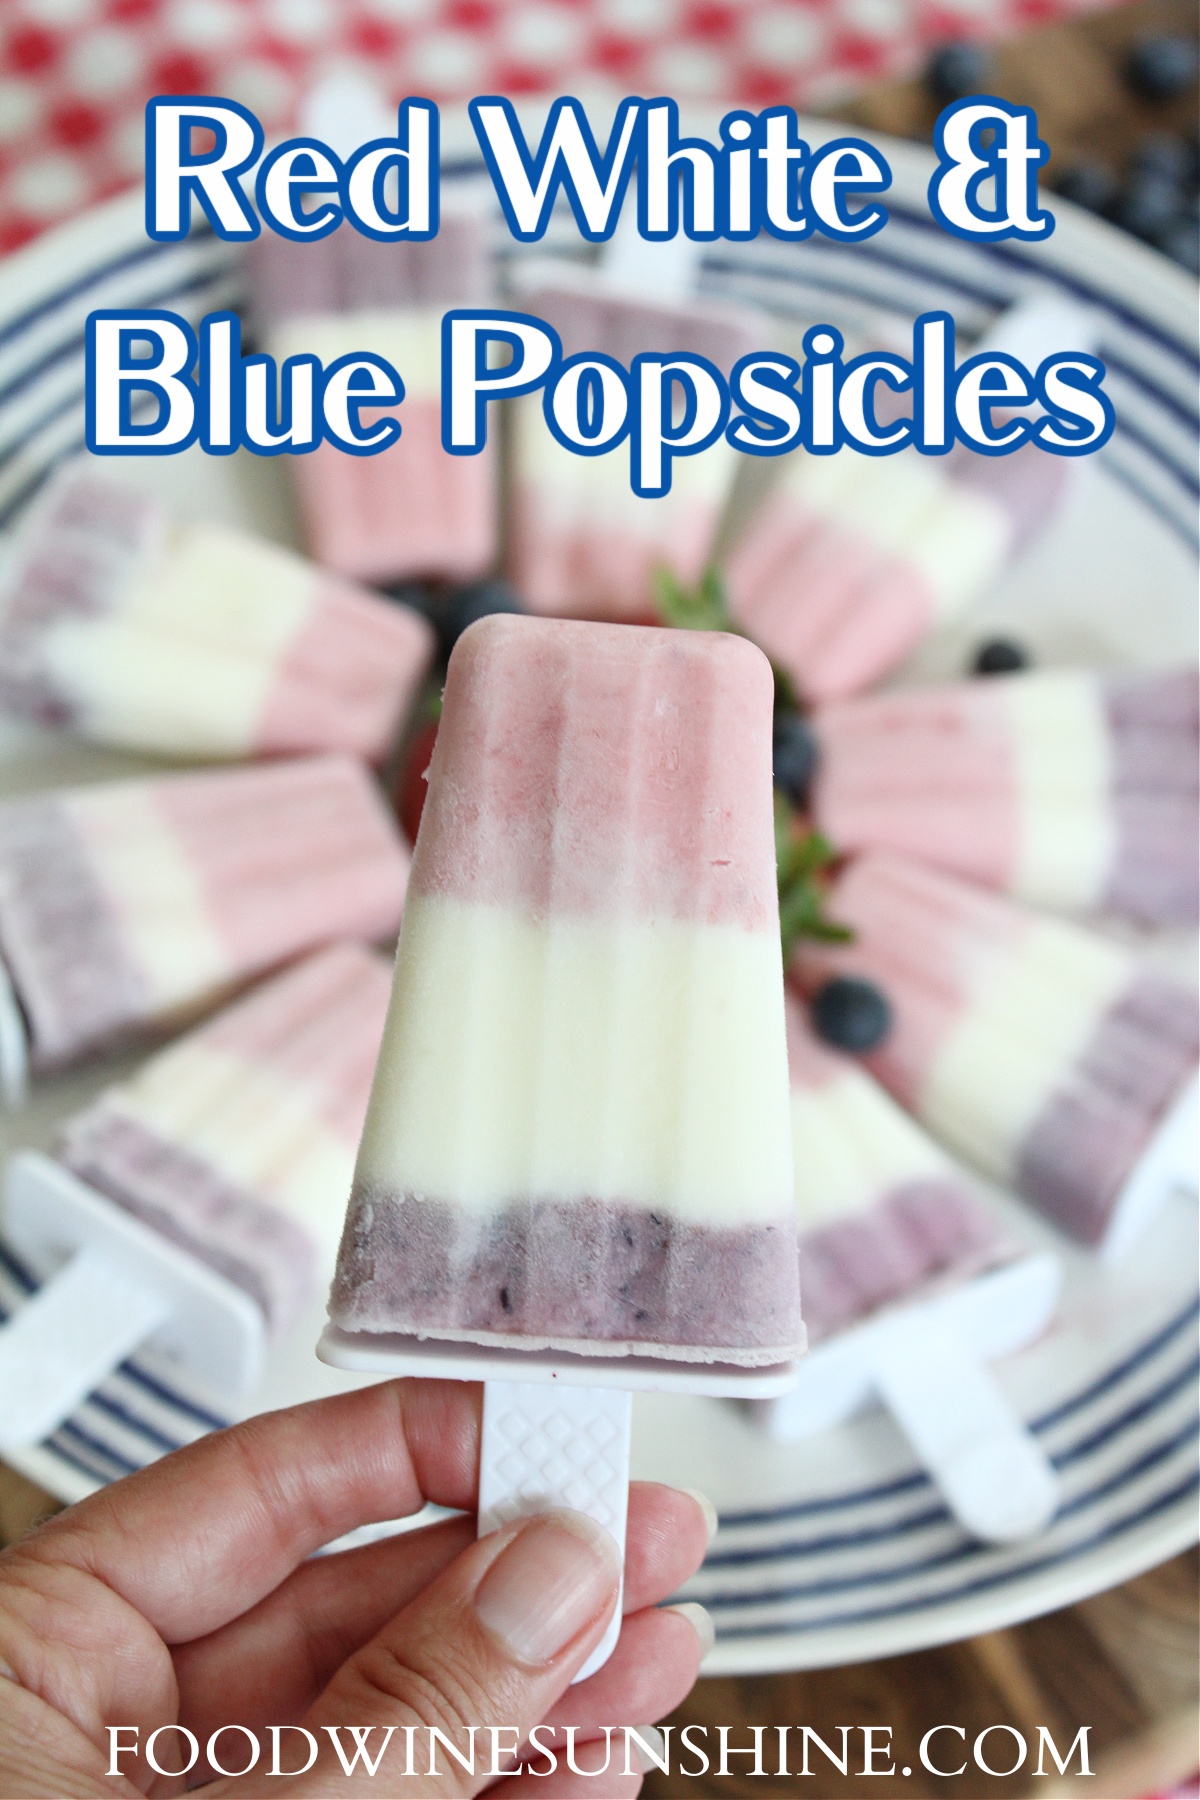 Red White and Blue Popsicles with vanilla yogurt and fruit